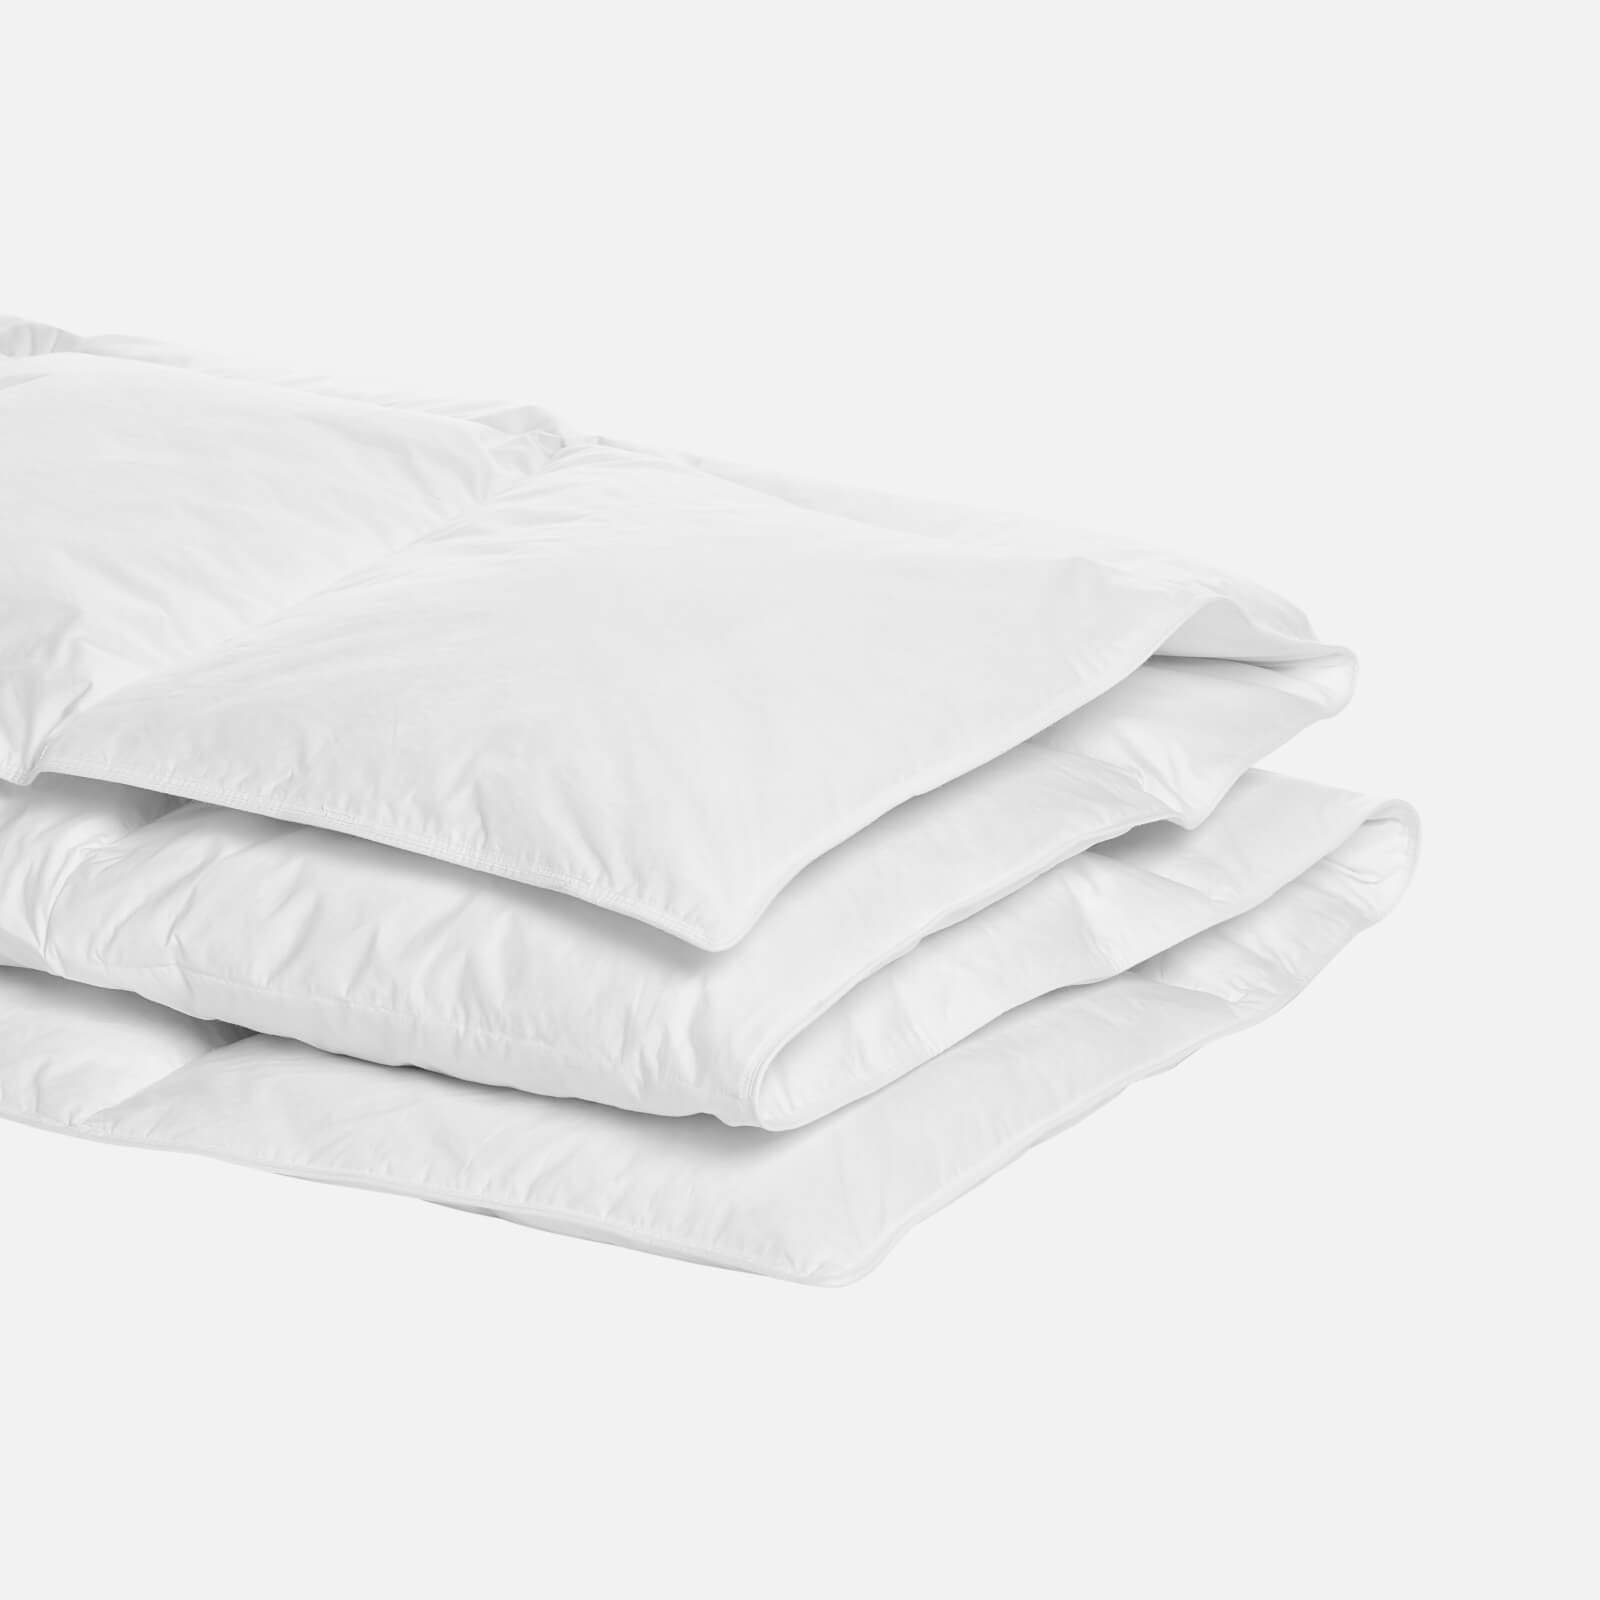 In Homeware Duck Feather And Down Duvet White 4 5 Tog Homeware